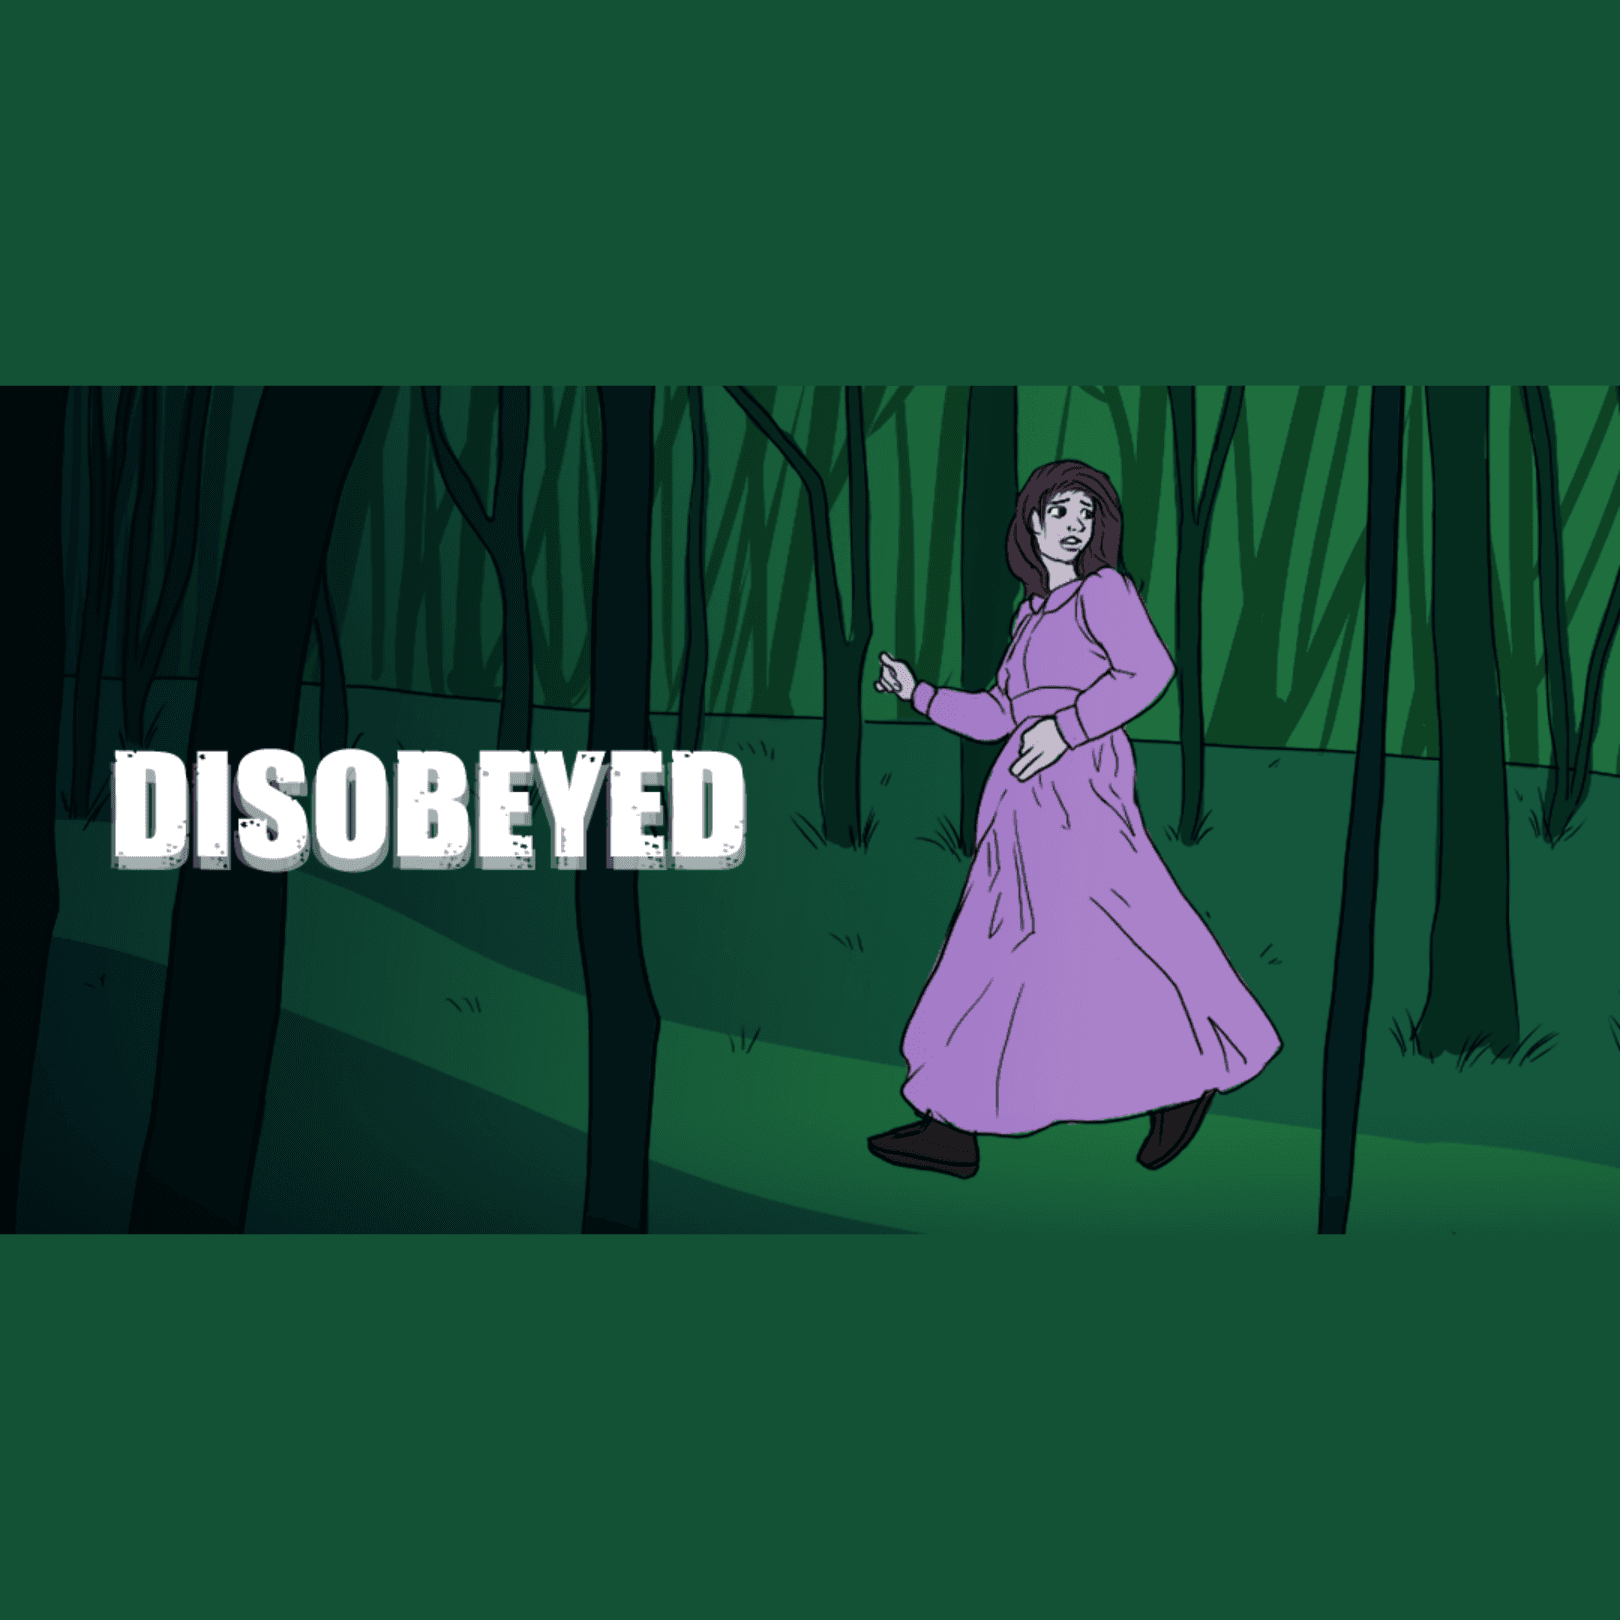 Thumbnail for "Disobeyed: Elissa Wall’s Journey To Reclaim Her Body".